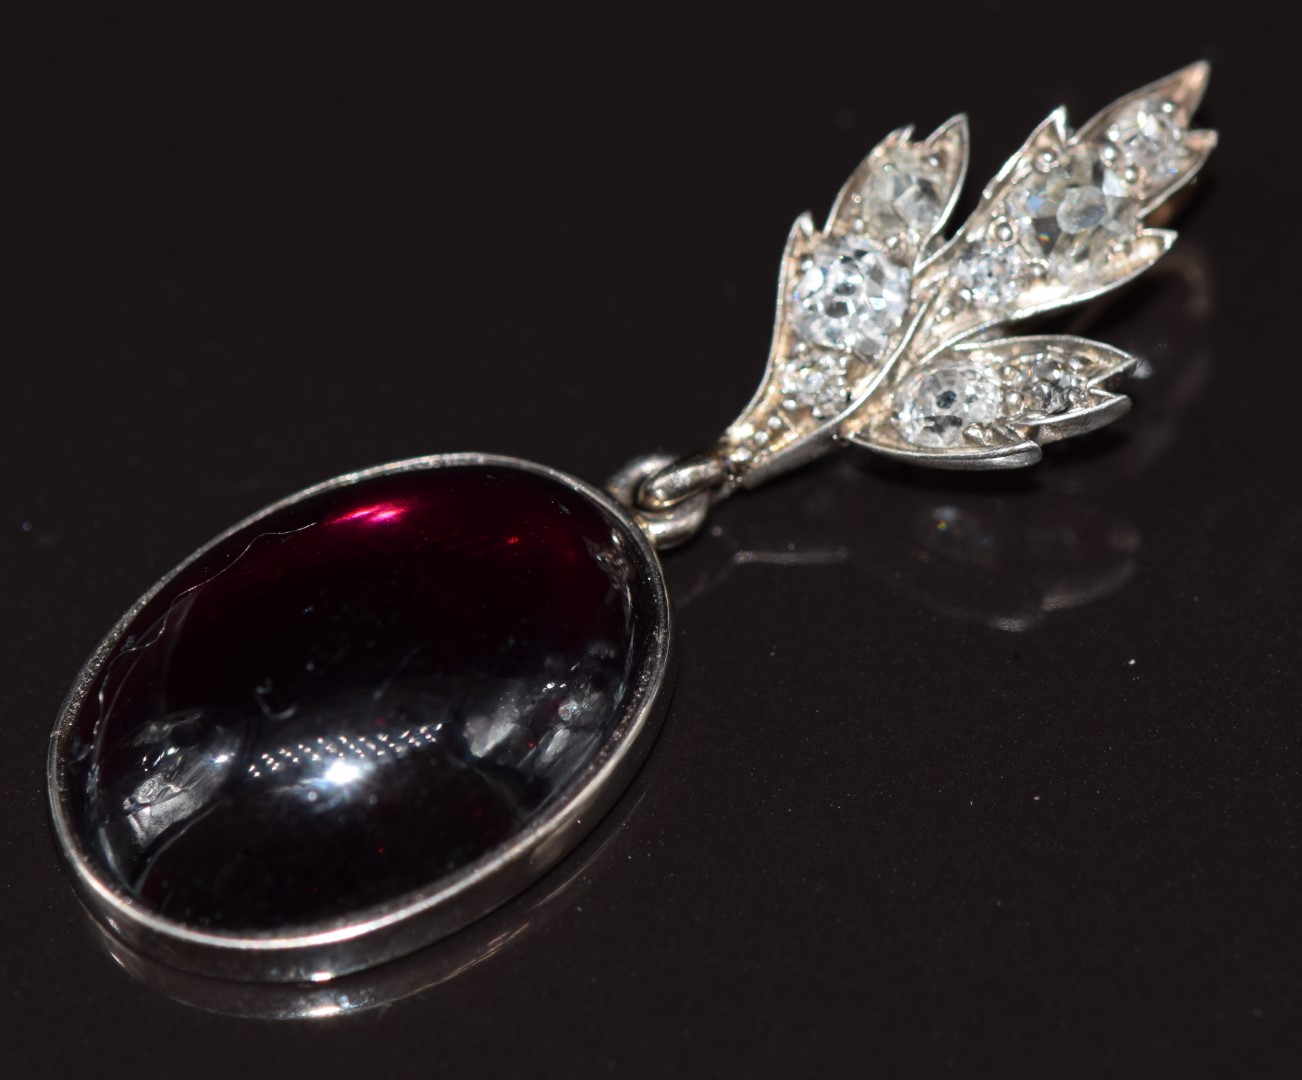 Victorian 9ct gold pendant set with a garnet cabochon and old cut diamonds in a foliate setting, the